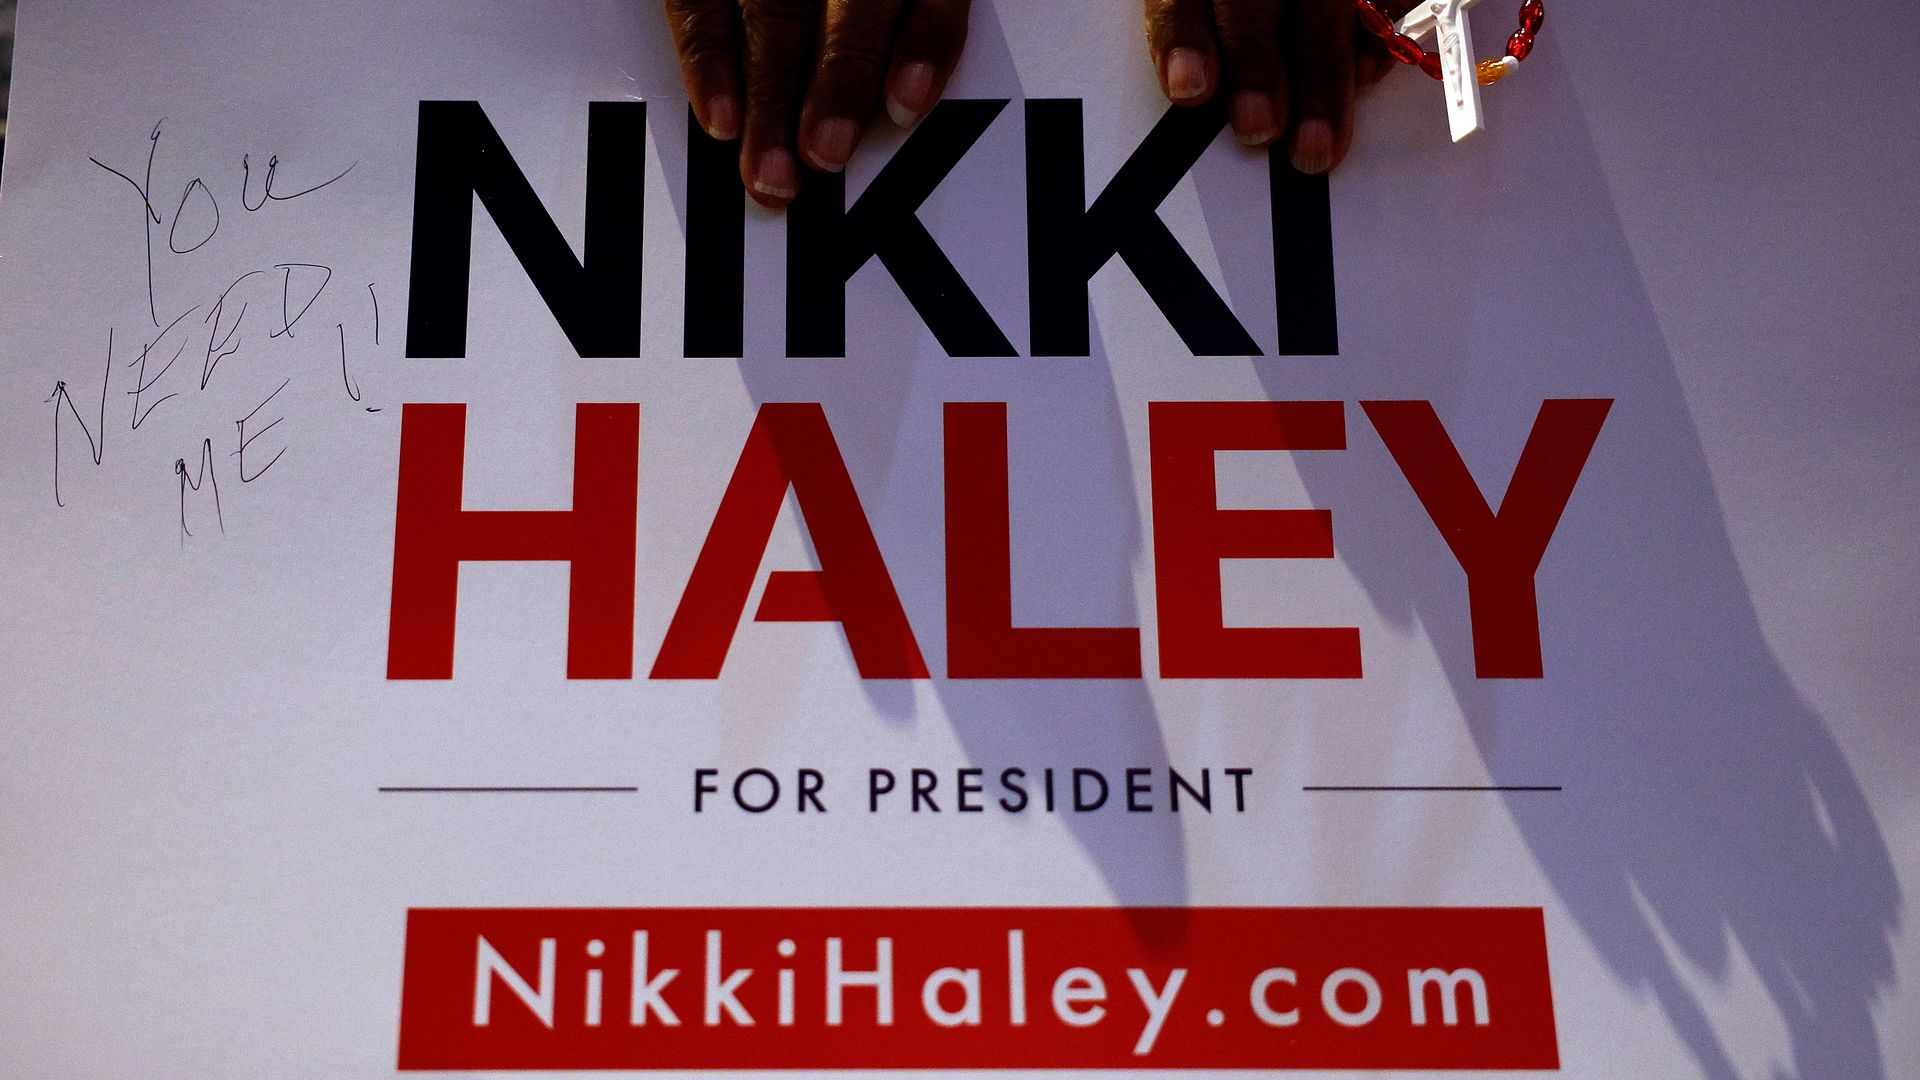 A campaign sign at a Nikki Haley rally Feb. 26 in Minnesota. Minnesota holds its primary election on March 5. Photo: David Berding/Getty Images